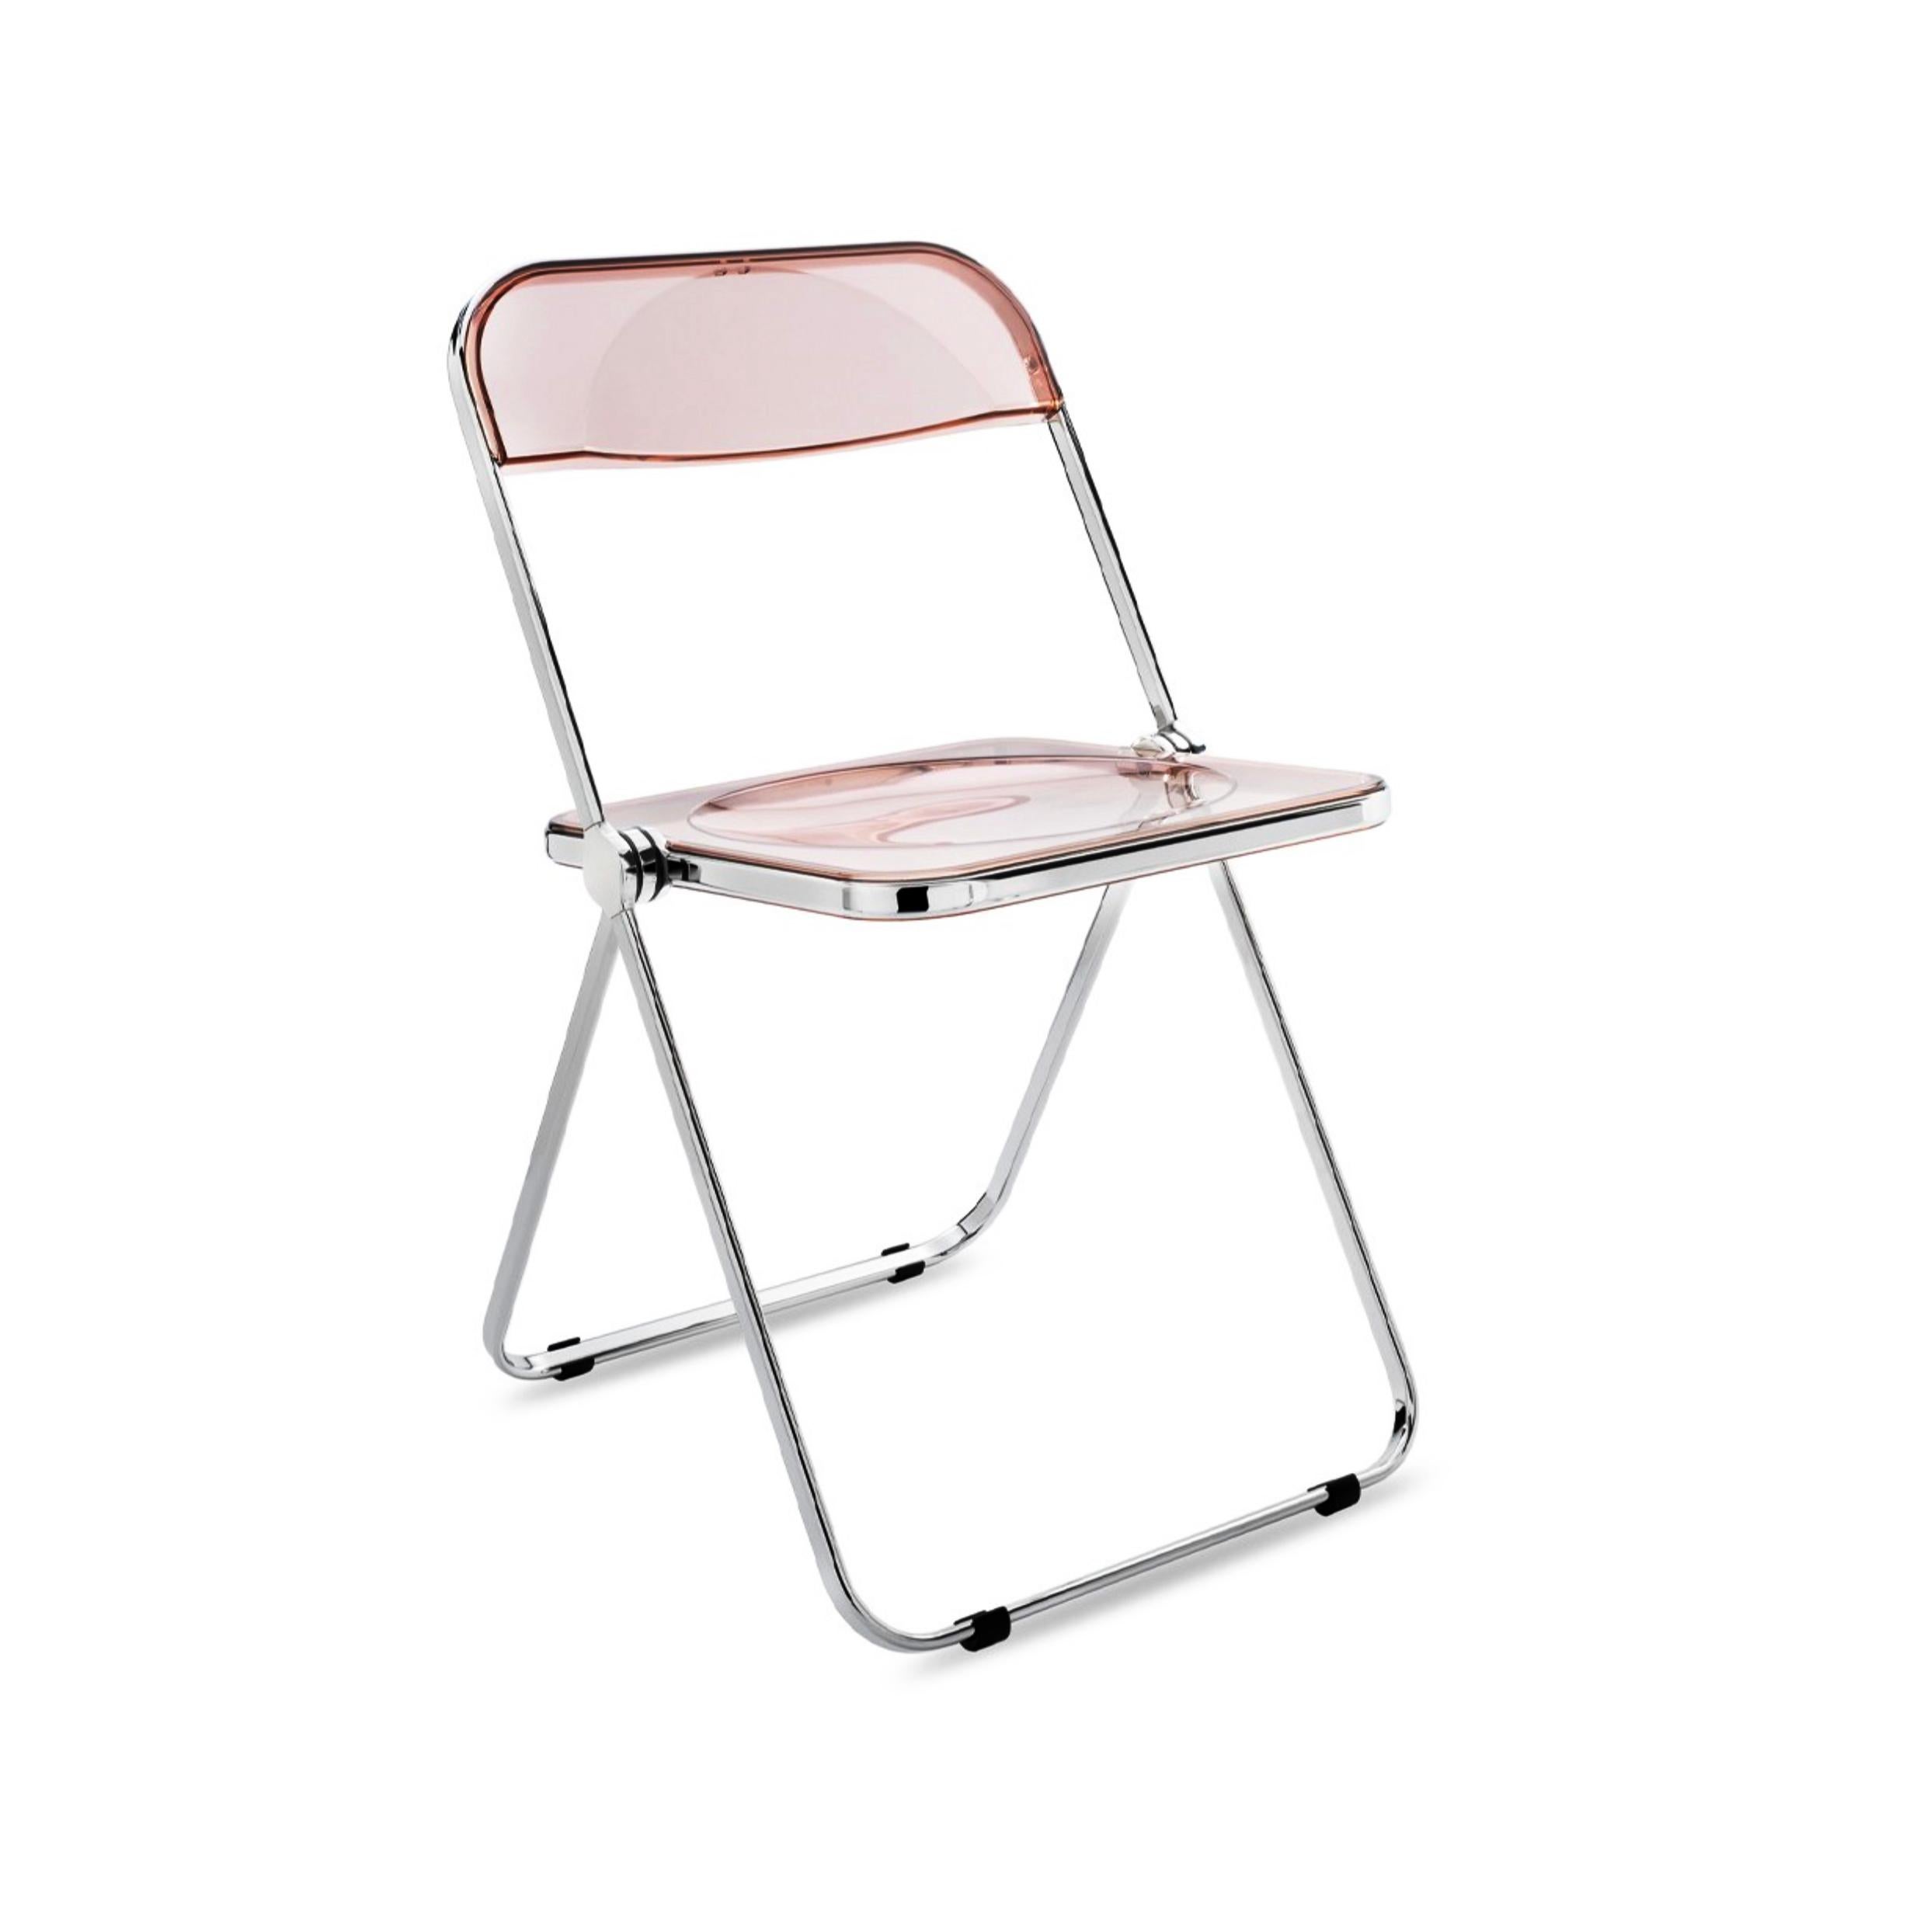 Italian Set of 12 Lucite Pink and Chrome Plia Chairs, Piretti for Castelli, Italy 1970s For Sale